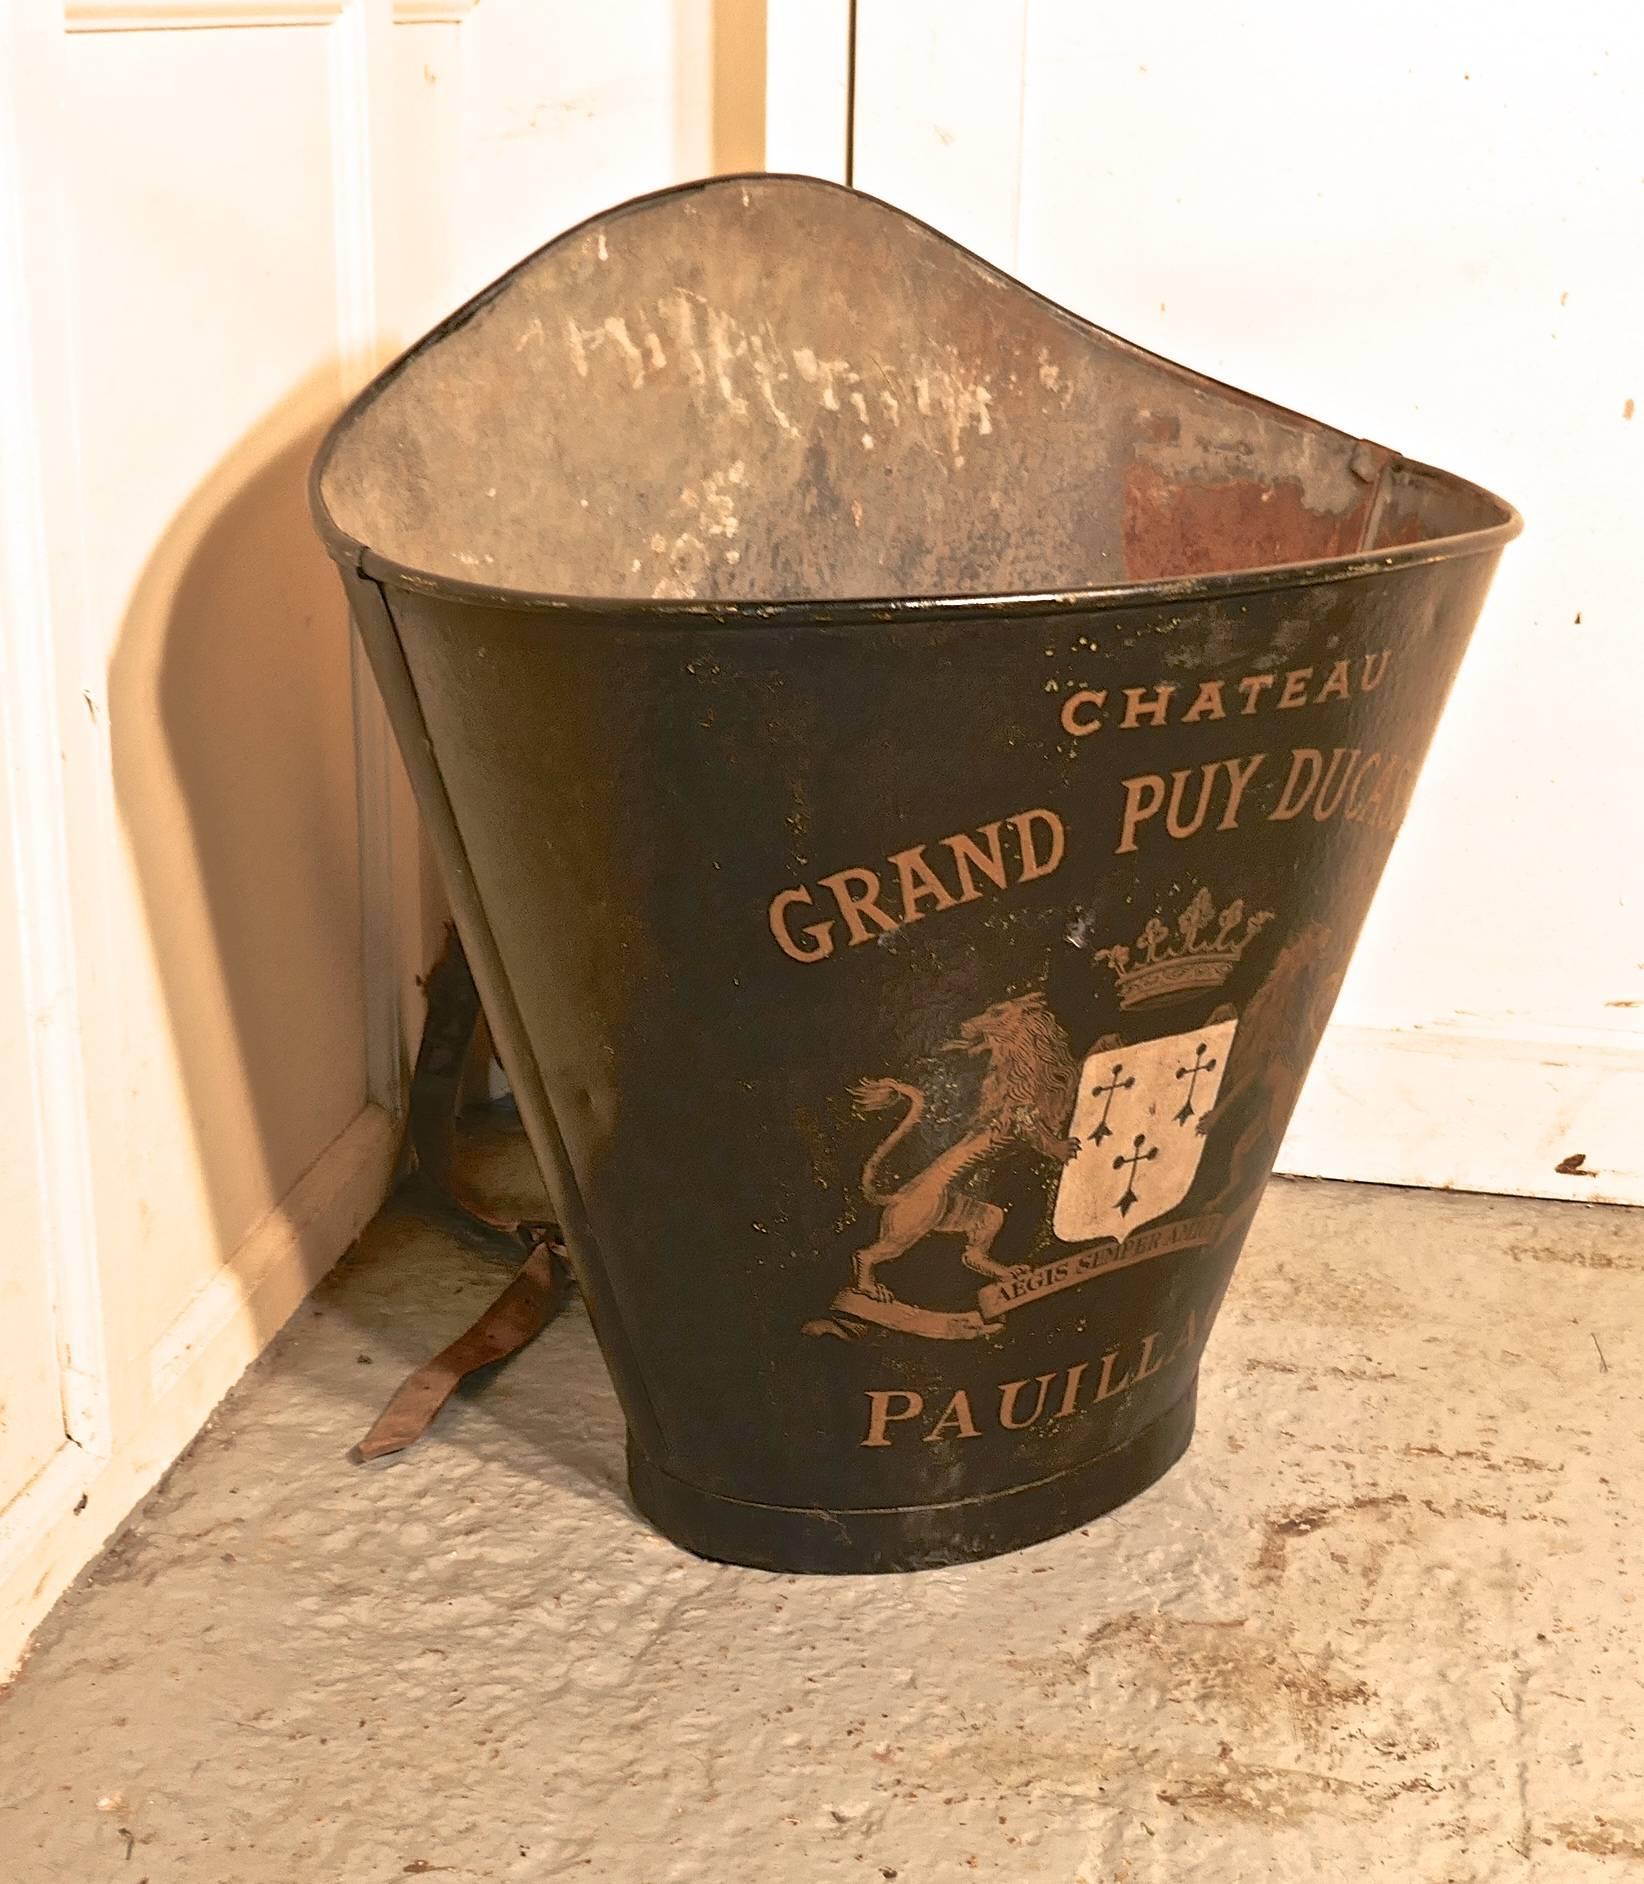 19th century French vineyard grape hod from Chateau Grand Puy Ducasse Pauillac

A French grape hod from the Medoc Region I the South of France, this galvanized hod would have been worn on the back of the grape picker. The hod has a painted black